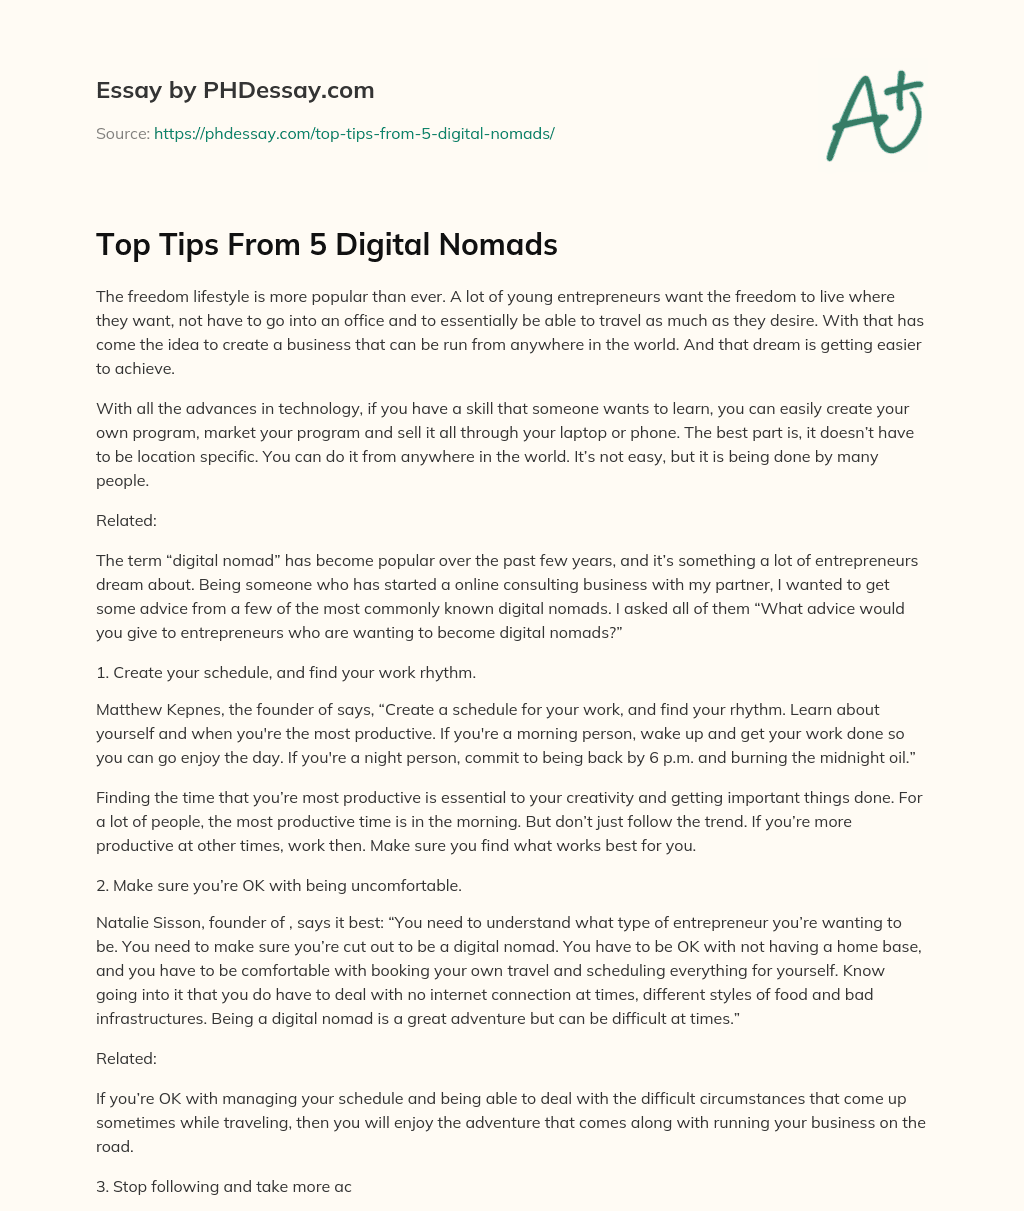 Top Tips From 5 Digital Nomads essay